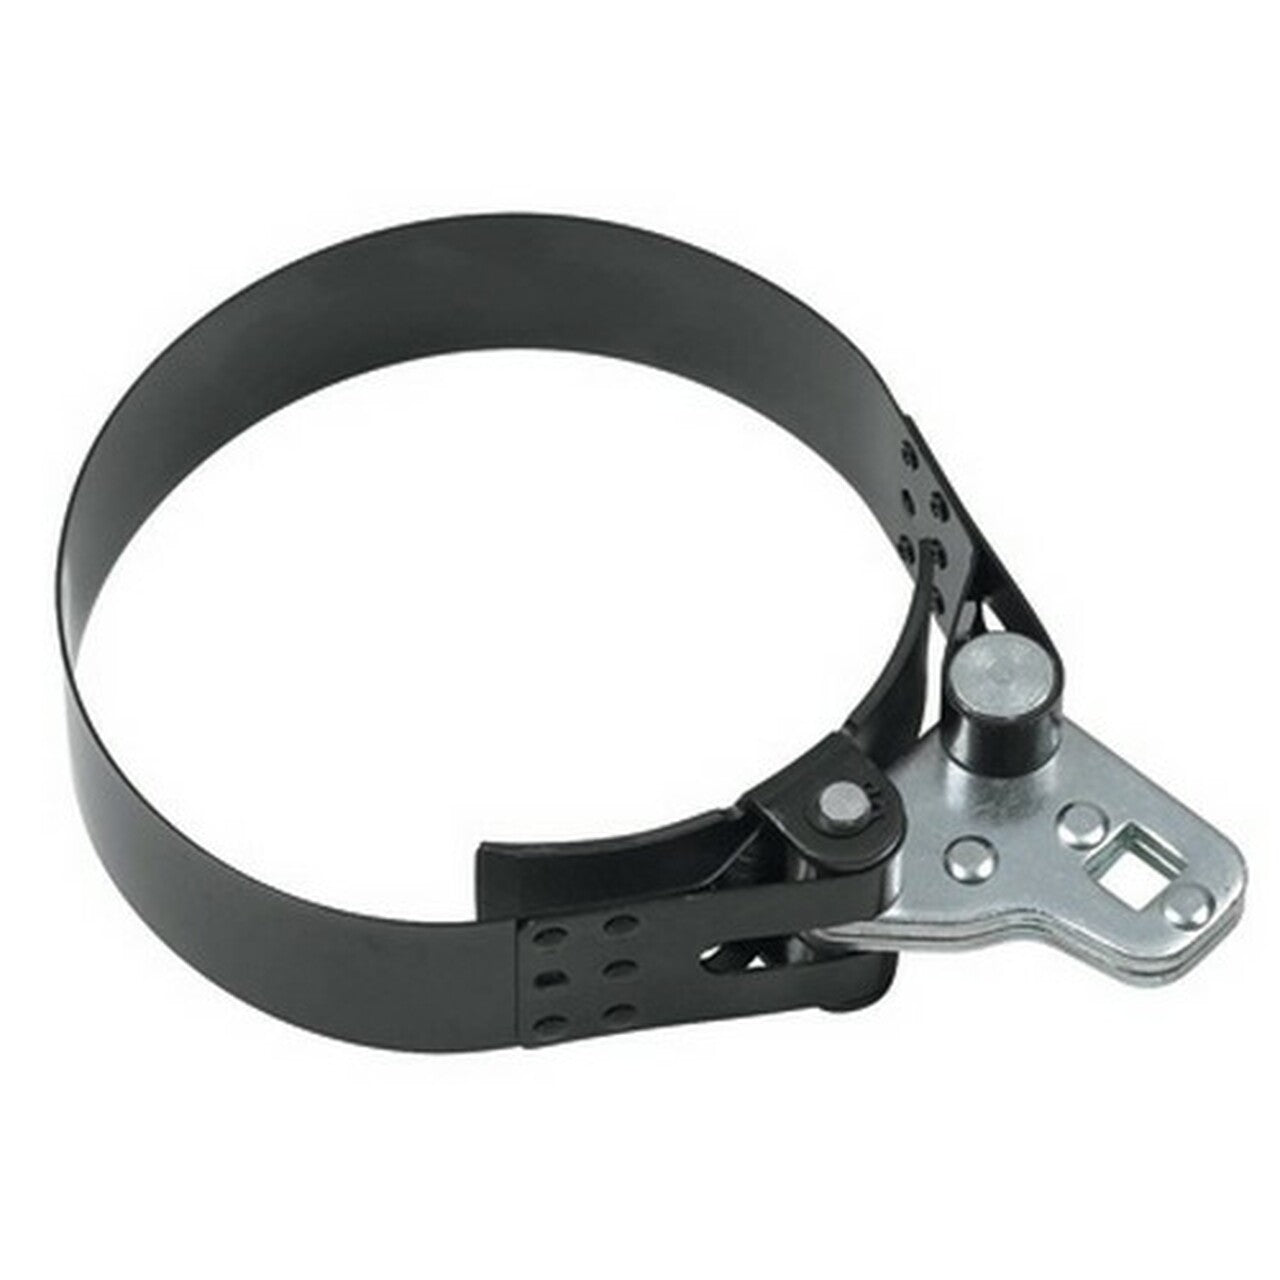 Heavy-Duty Oil Filter Wrench 4-1/2" to 5-1/4"